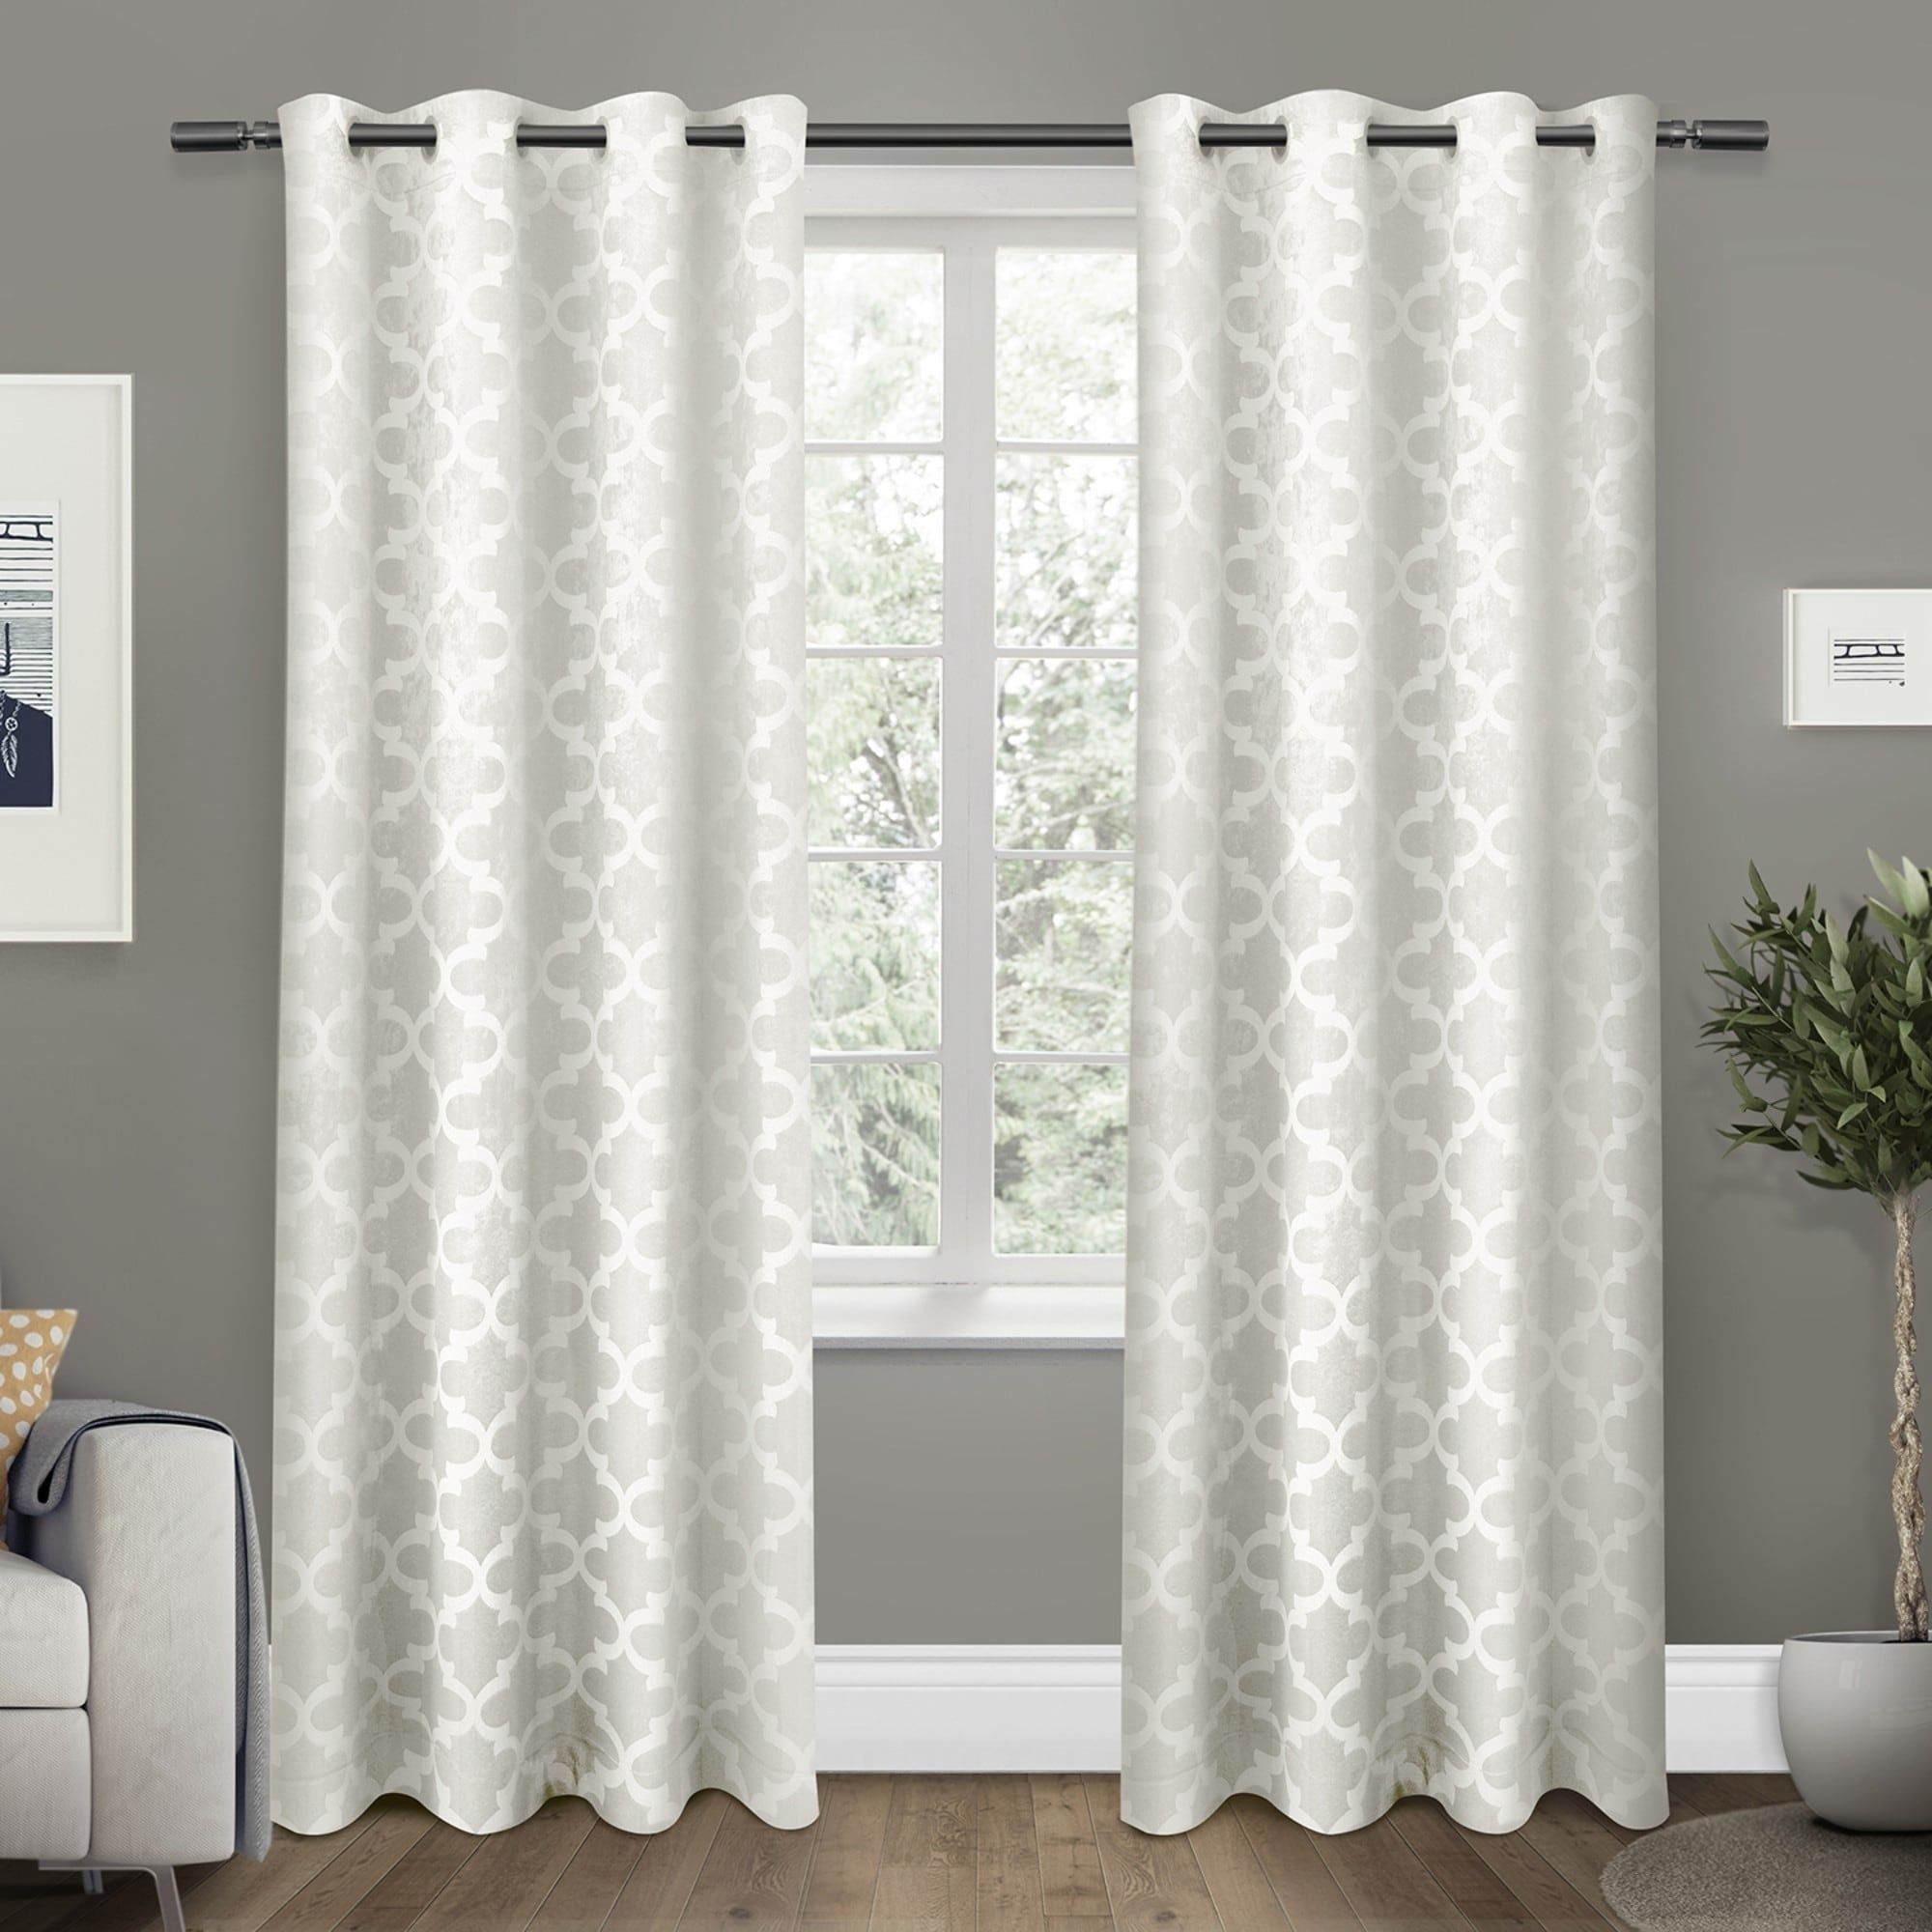 Ati Home Woven Blackout Curtain Panel Pair With Grommet Top For Woven Blackout Curtain Panel Pairs With Grommet Top (View 6 of 30)